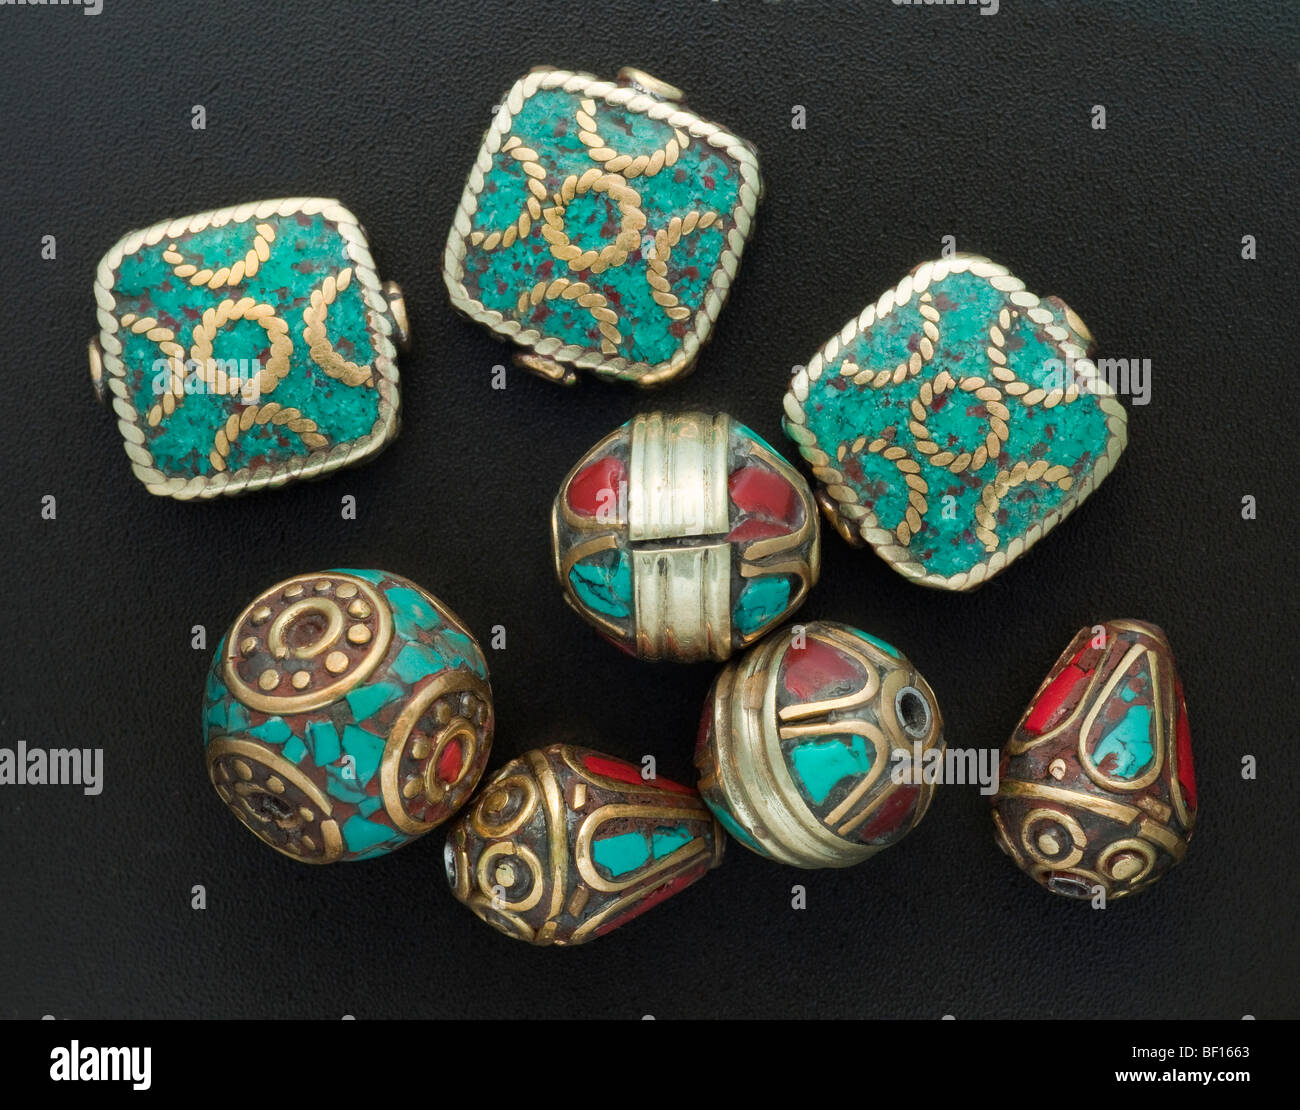 Nepalese crafted earings and jewellery fancy goods, enameled, silver supports Stock Photo